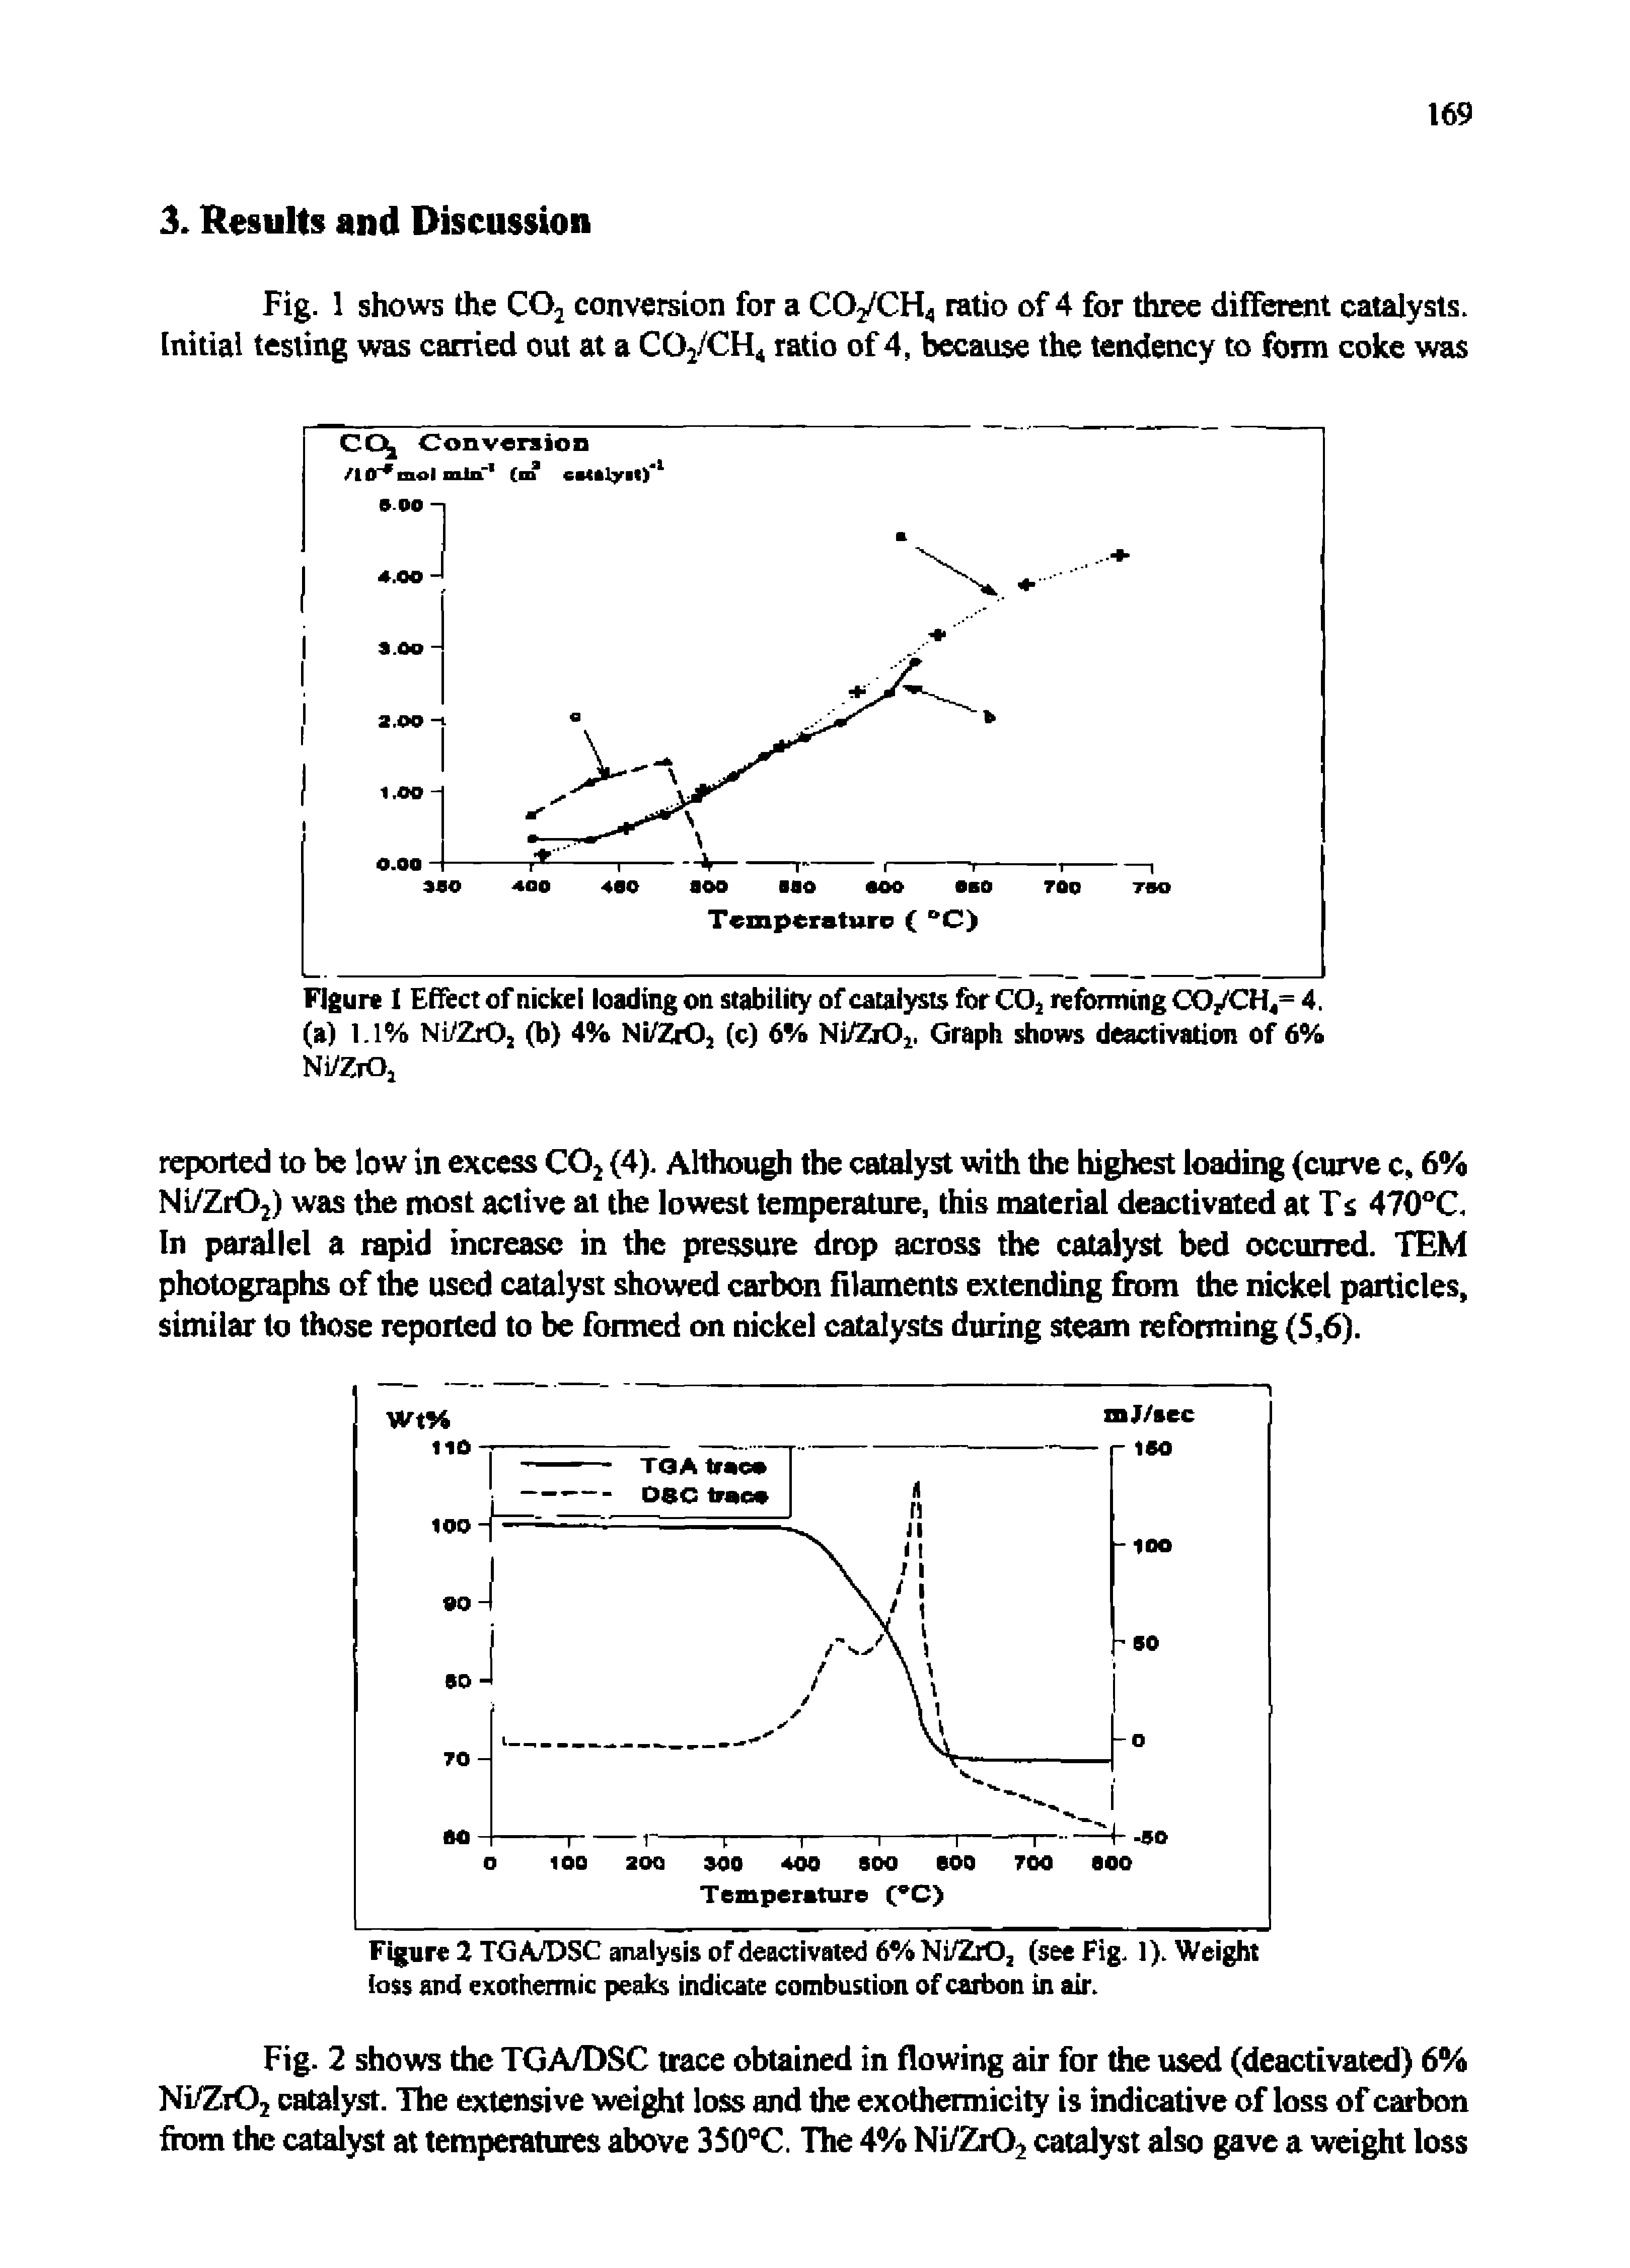 Figure 2 TG A/DSC analysis of deactivated 6% Ni/ZrOa (see Fig. 1). Weight loss and exothermic peaks indicate combustion of carbon in air.